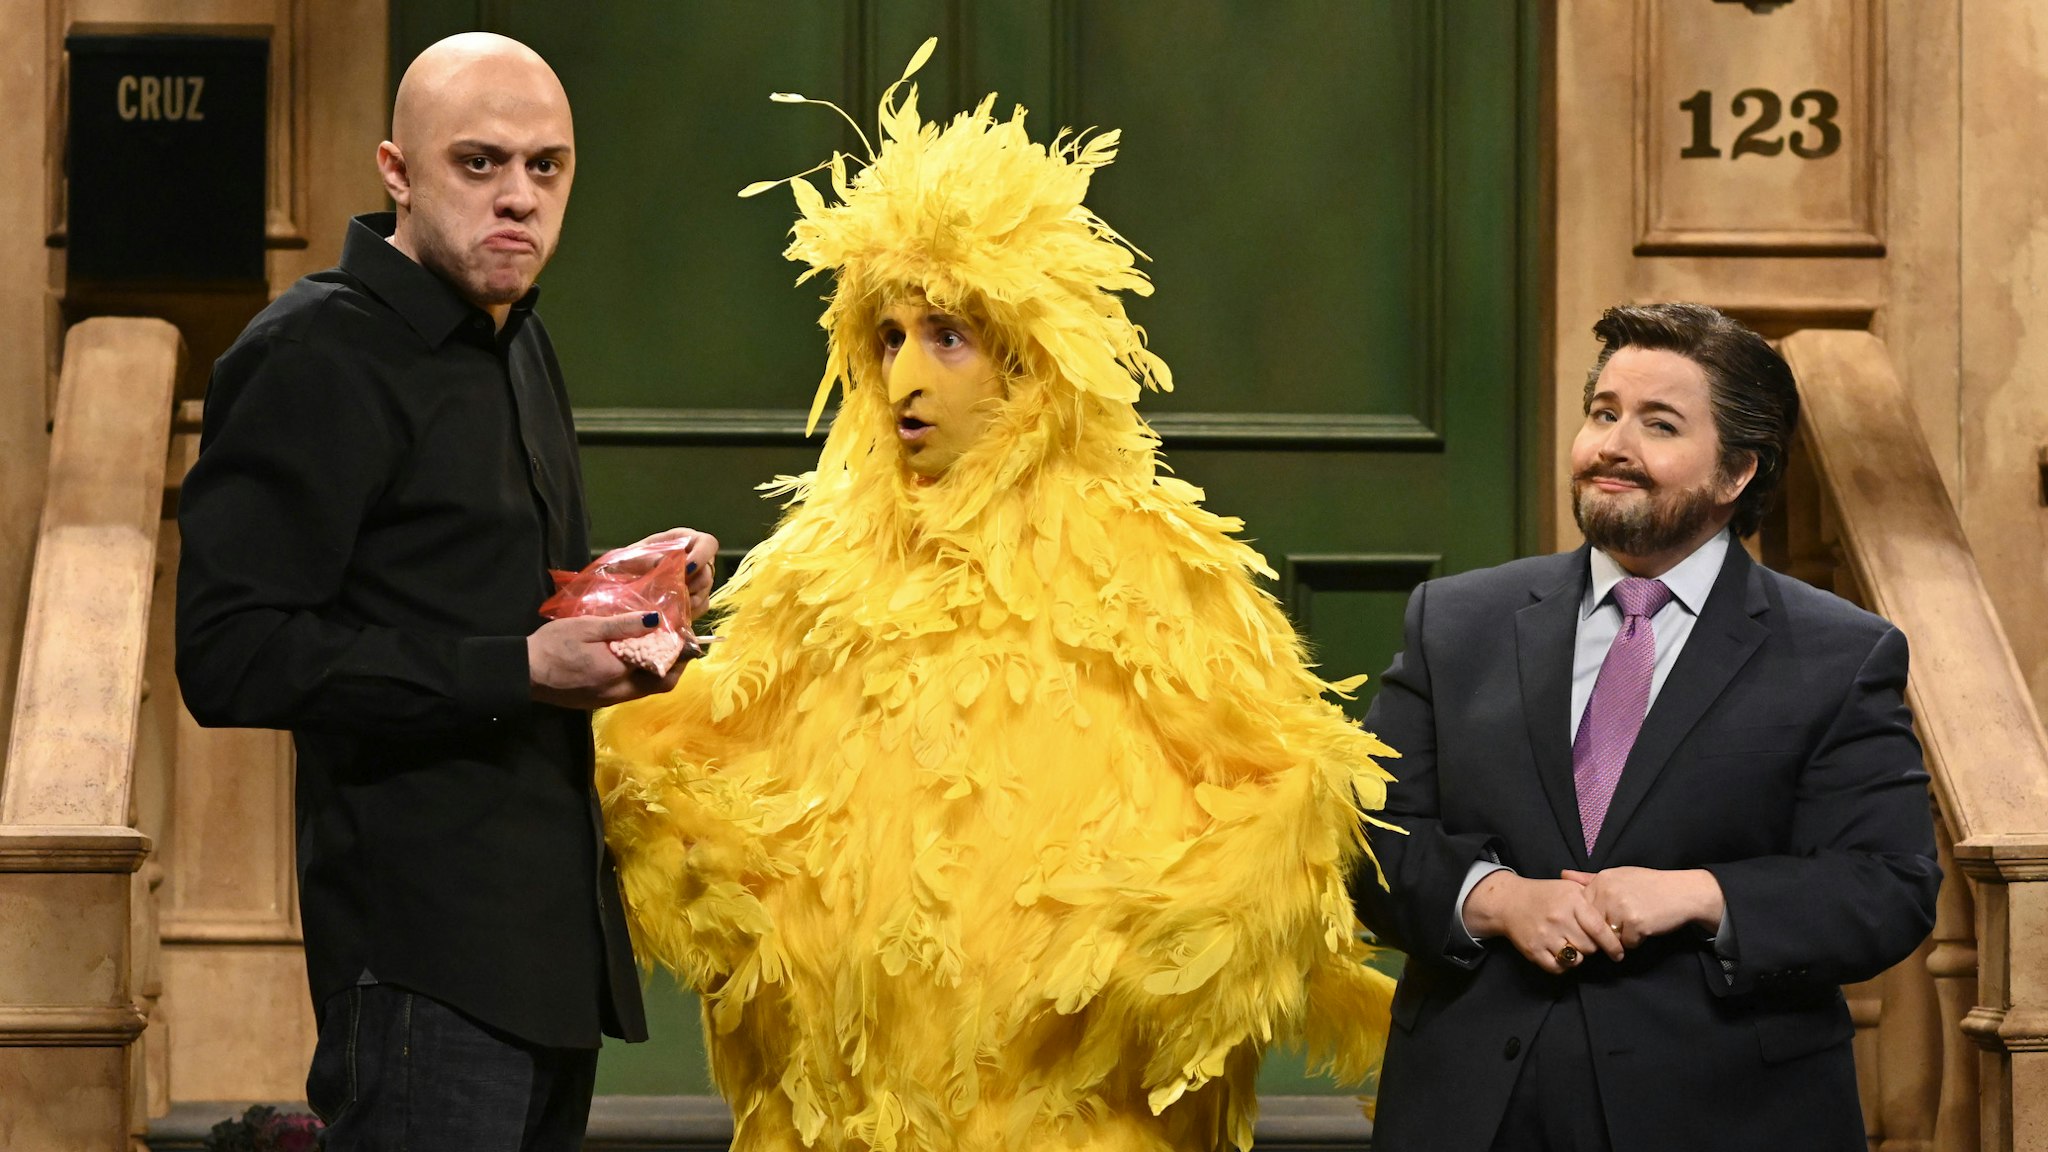 SATURDAY NIGHT LIVE -- "Jonathan Majors" Episode 1811 -- Pictured: (l-r) Pete Davidson as Joe Rogan, Kyle Mooney as Big Bird, Aidy Bryant as Ted Cruz, and Andrew Dismukes during the "Ted Cruz Sesame Street" Cold Open on Saturday, November 13, 2021 --